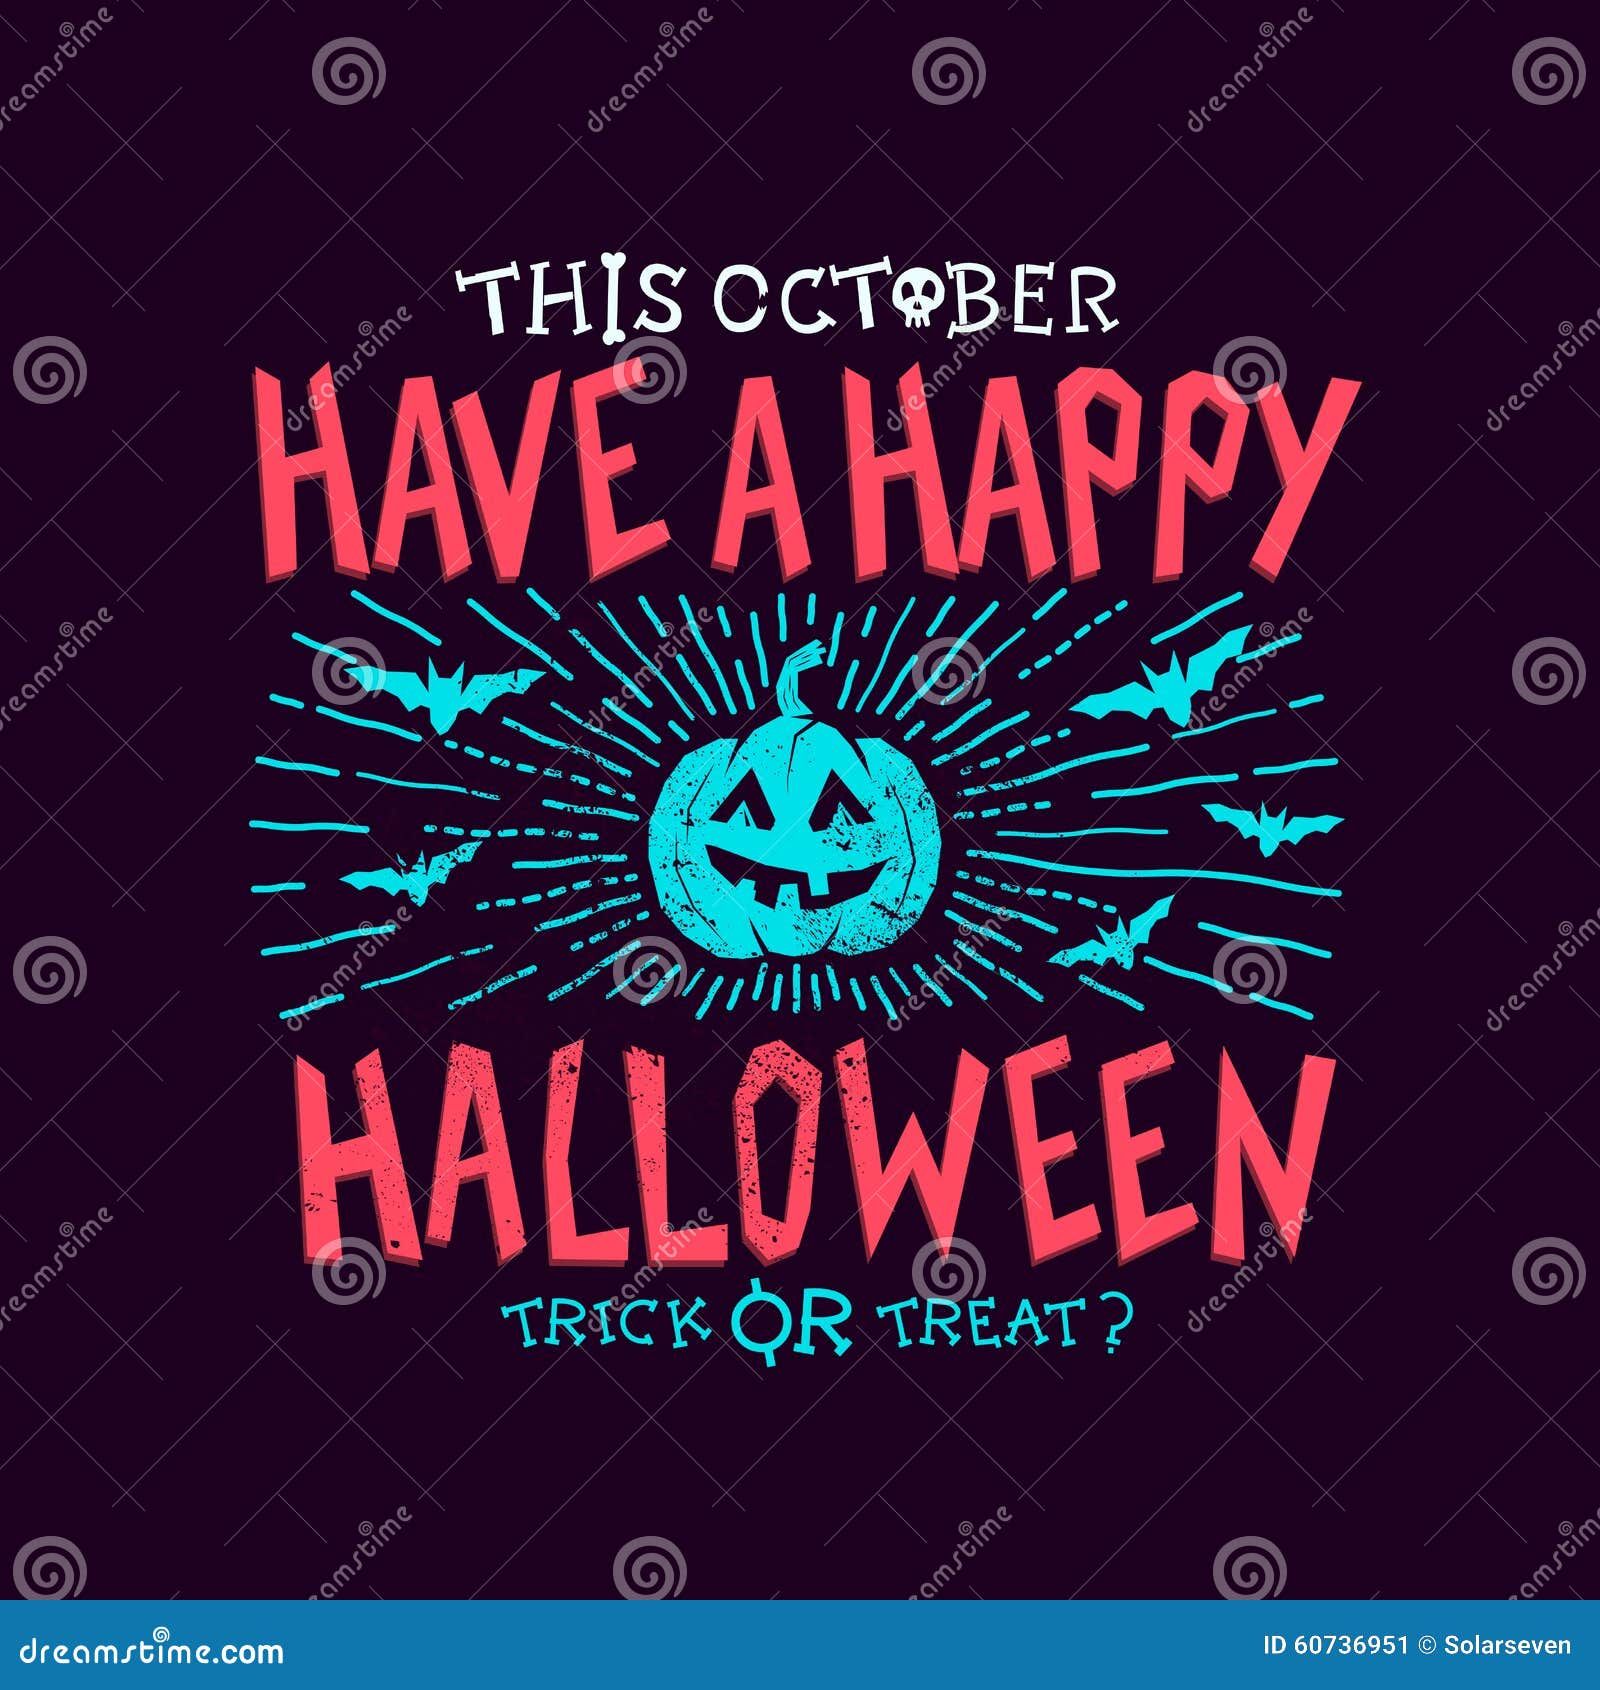 Spooky Halloween party stock vector. Illustration of decoration - 60736951